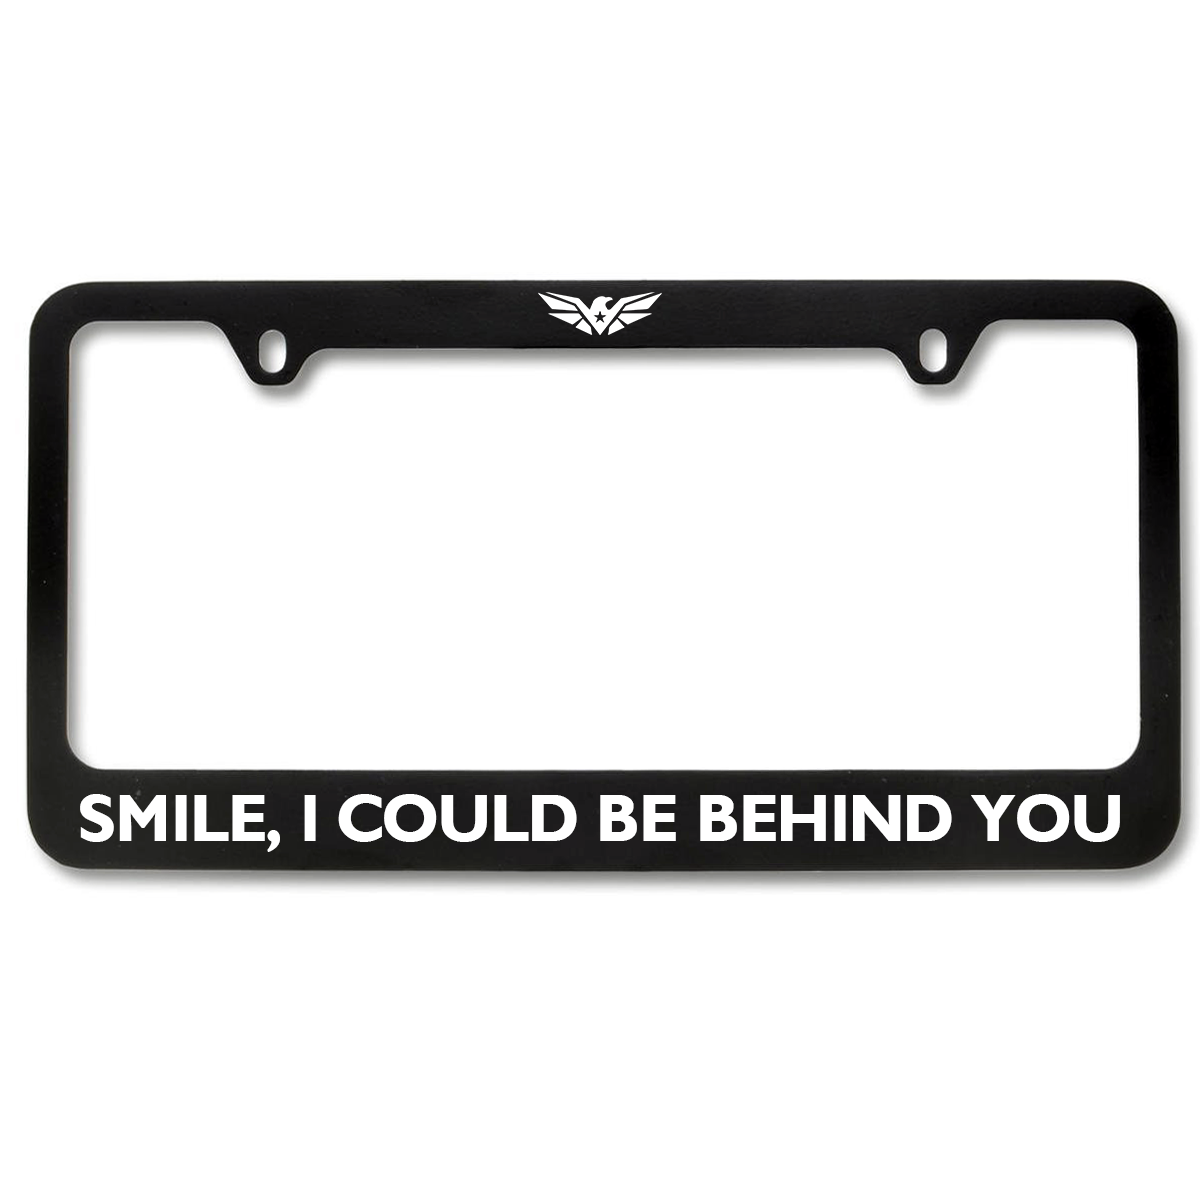 Smile, I Could Be Behind You License Plate Frame